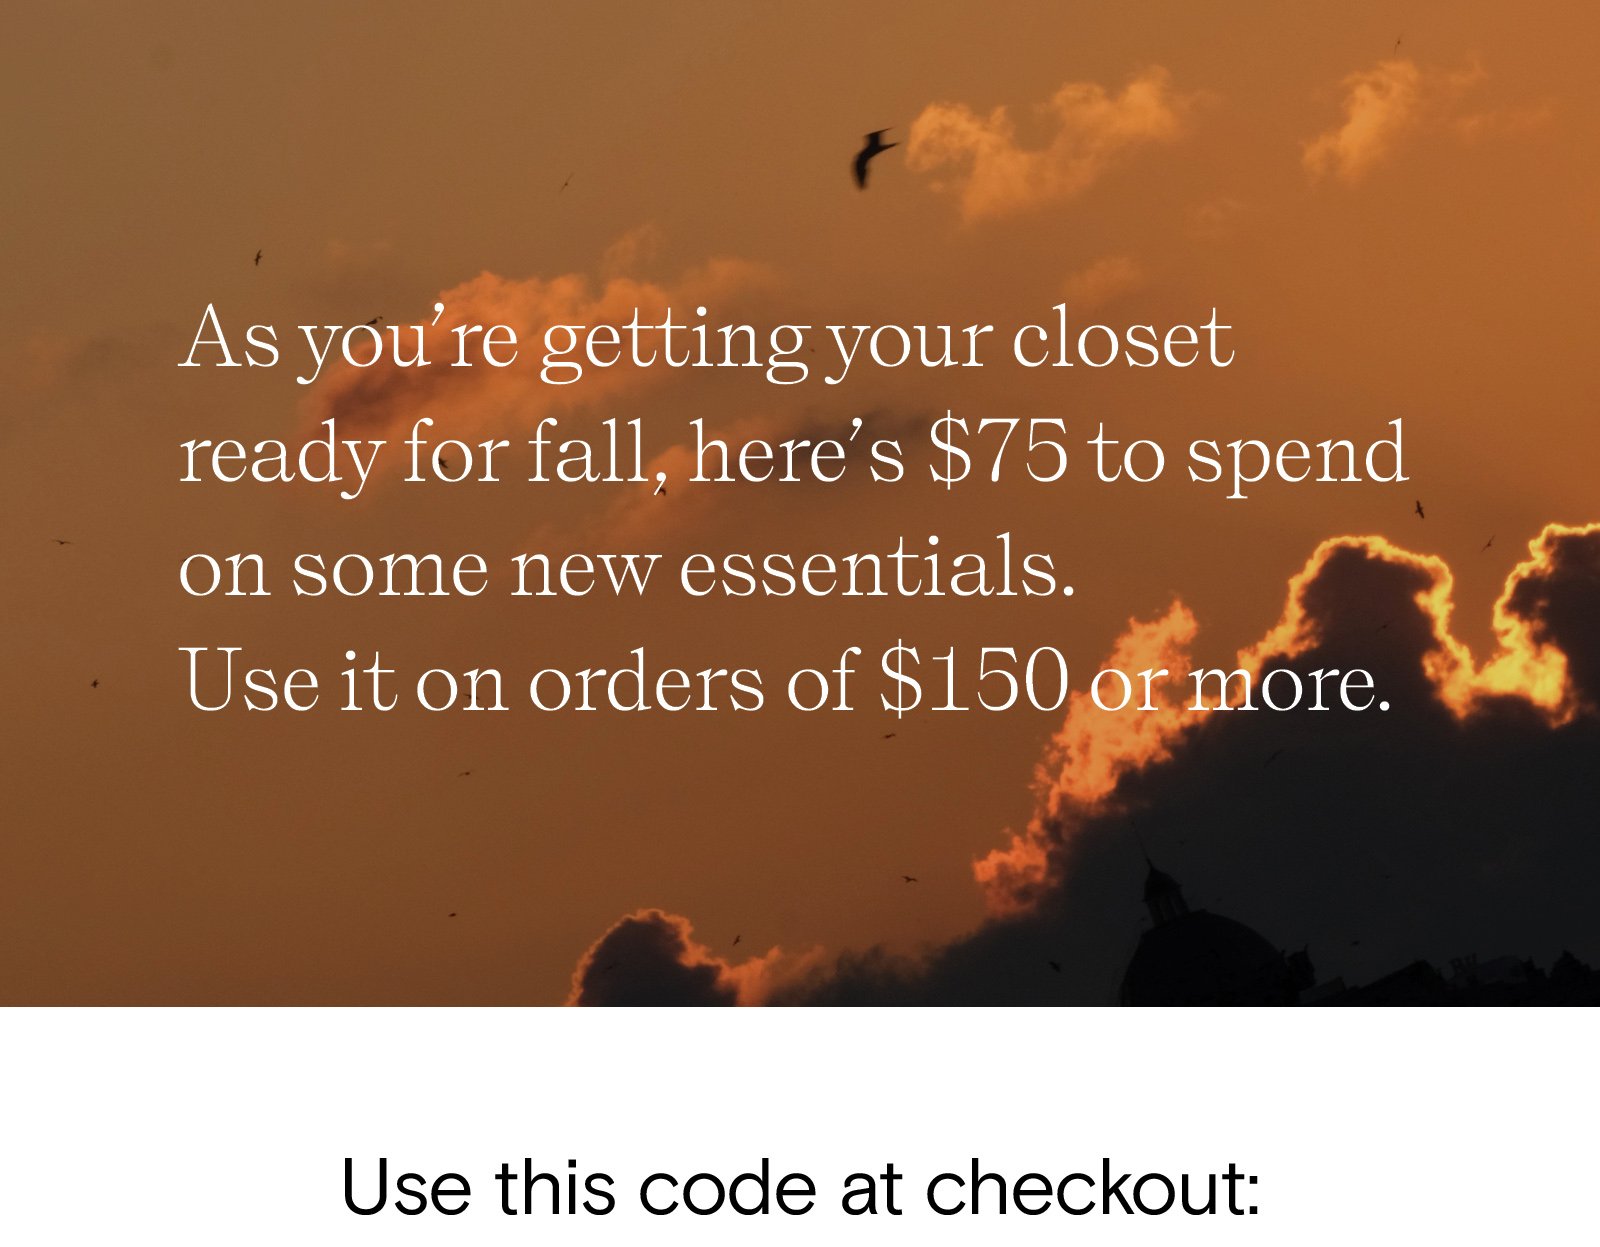 As you're getting your closet ready for fall, here's $75 to spend on some new essentials. Use it on orders of $150 or more.